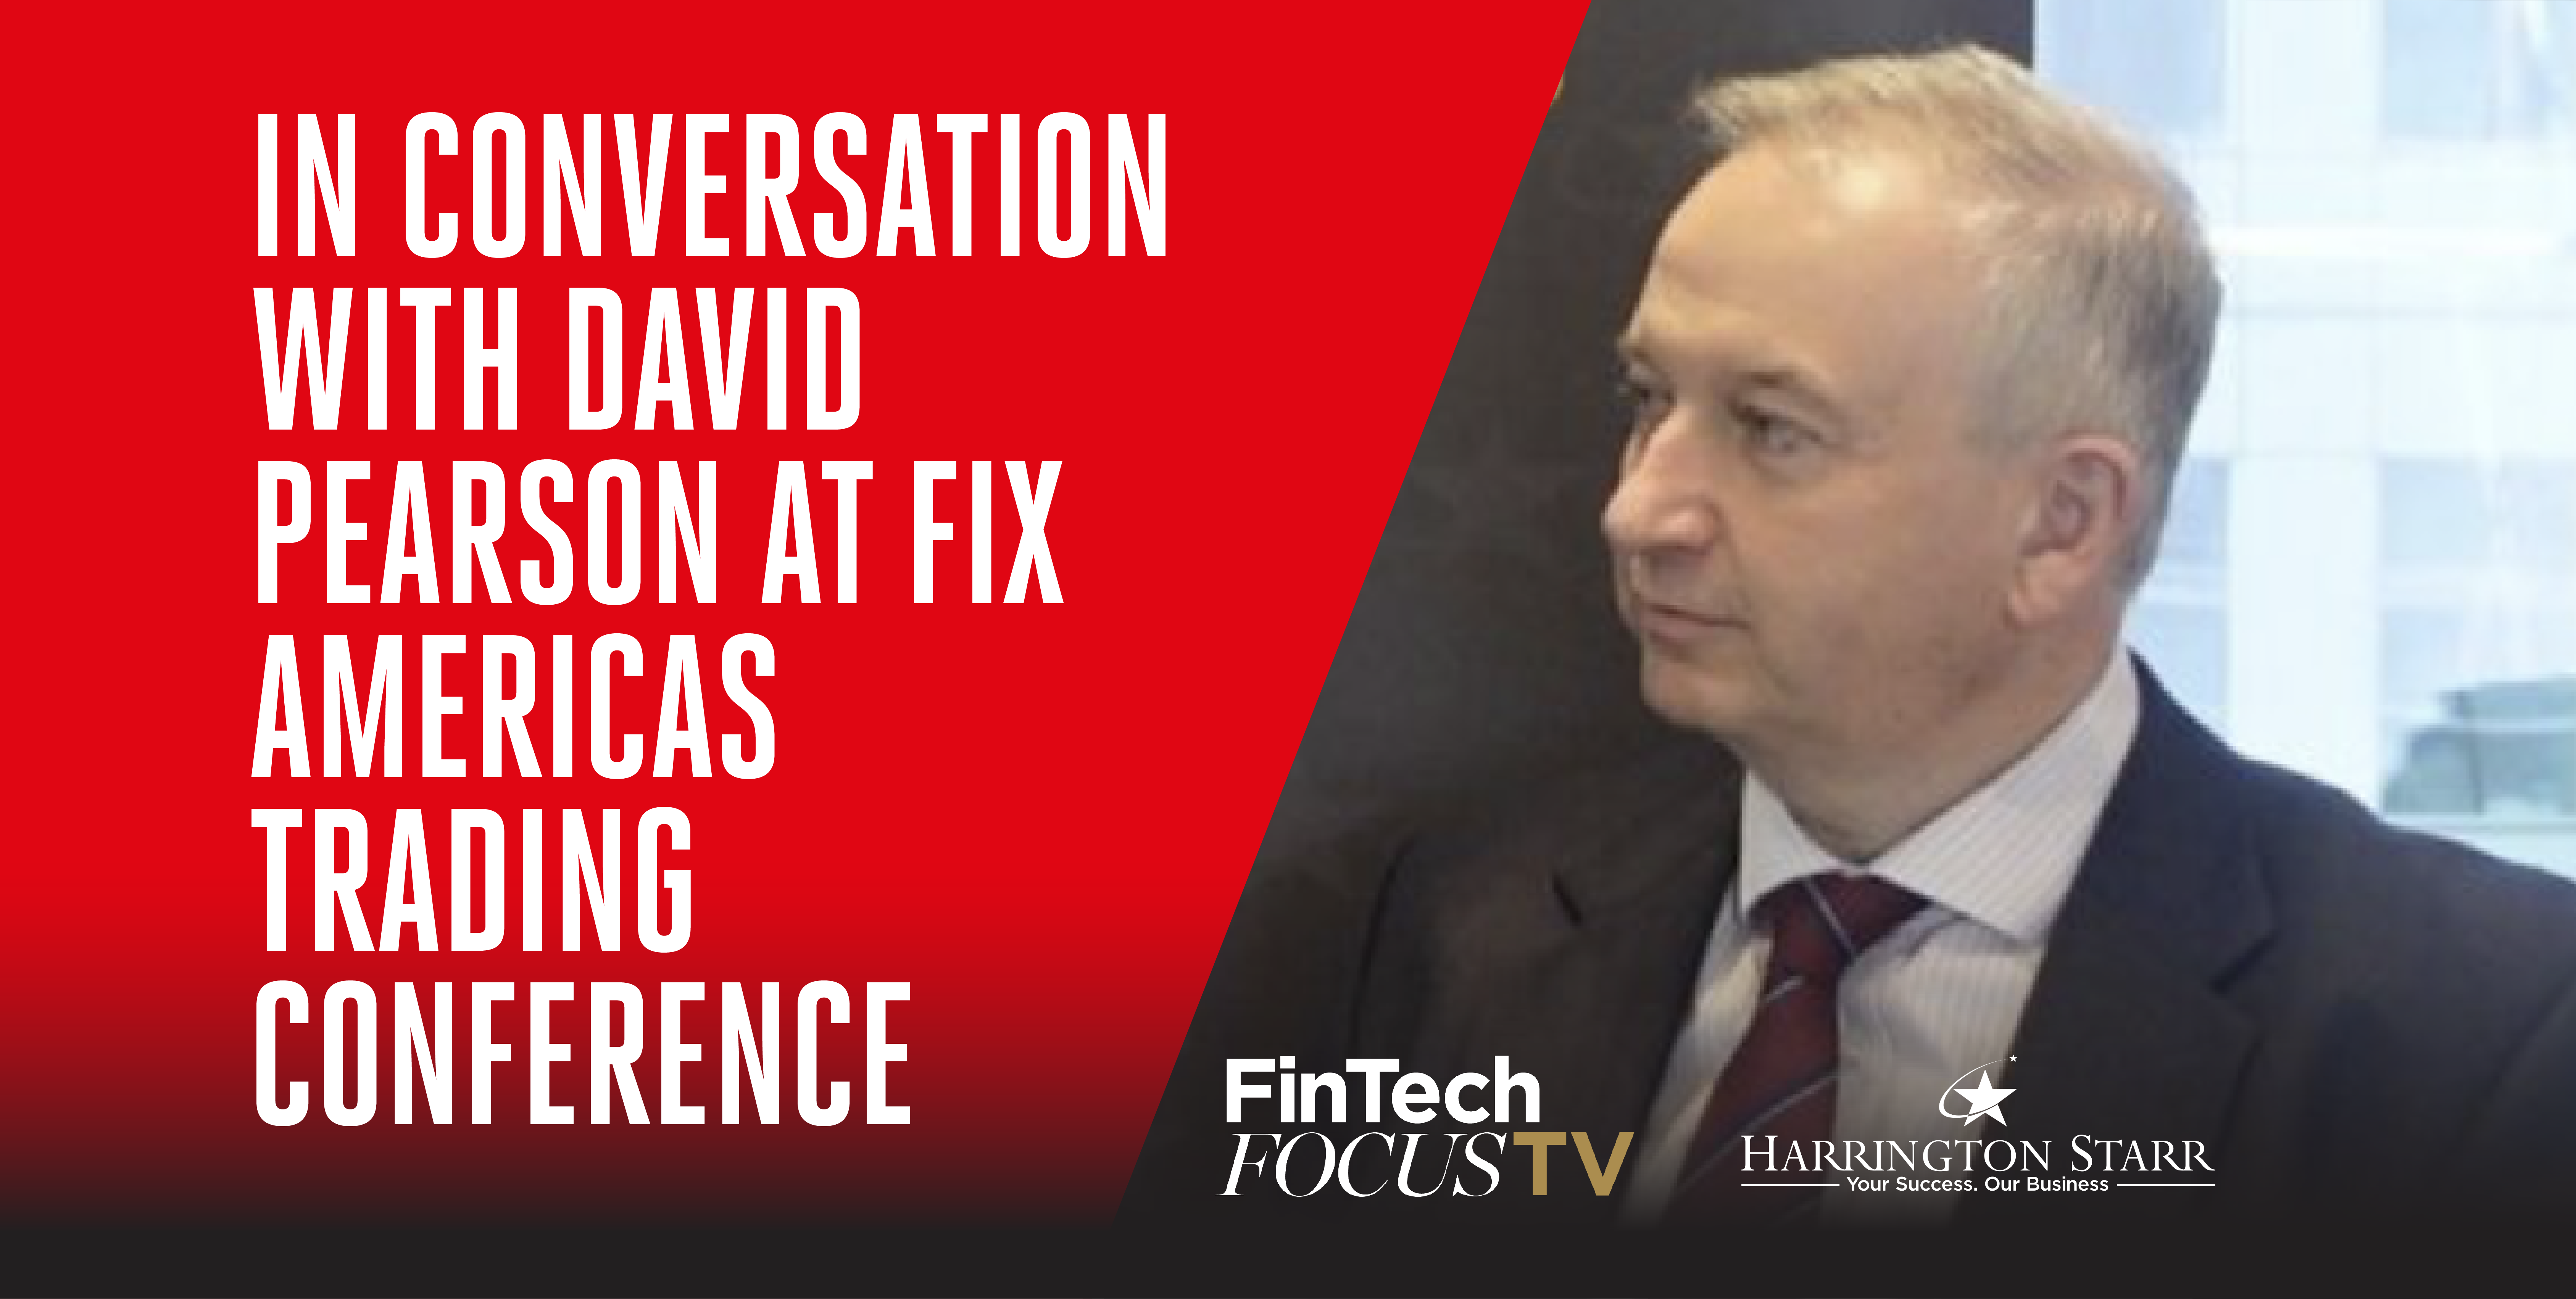 In Conversation with David Pearson at FIX Americas Trading Conference